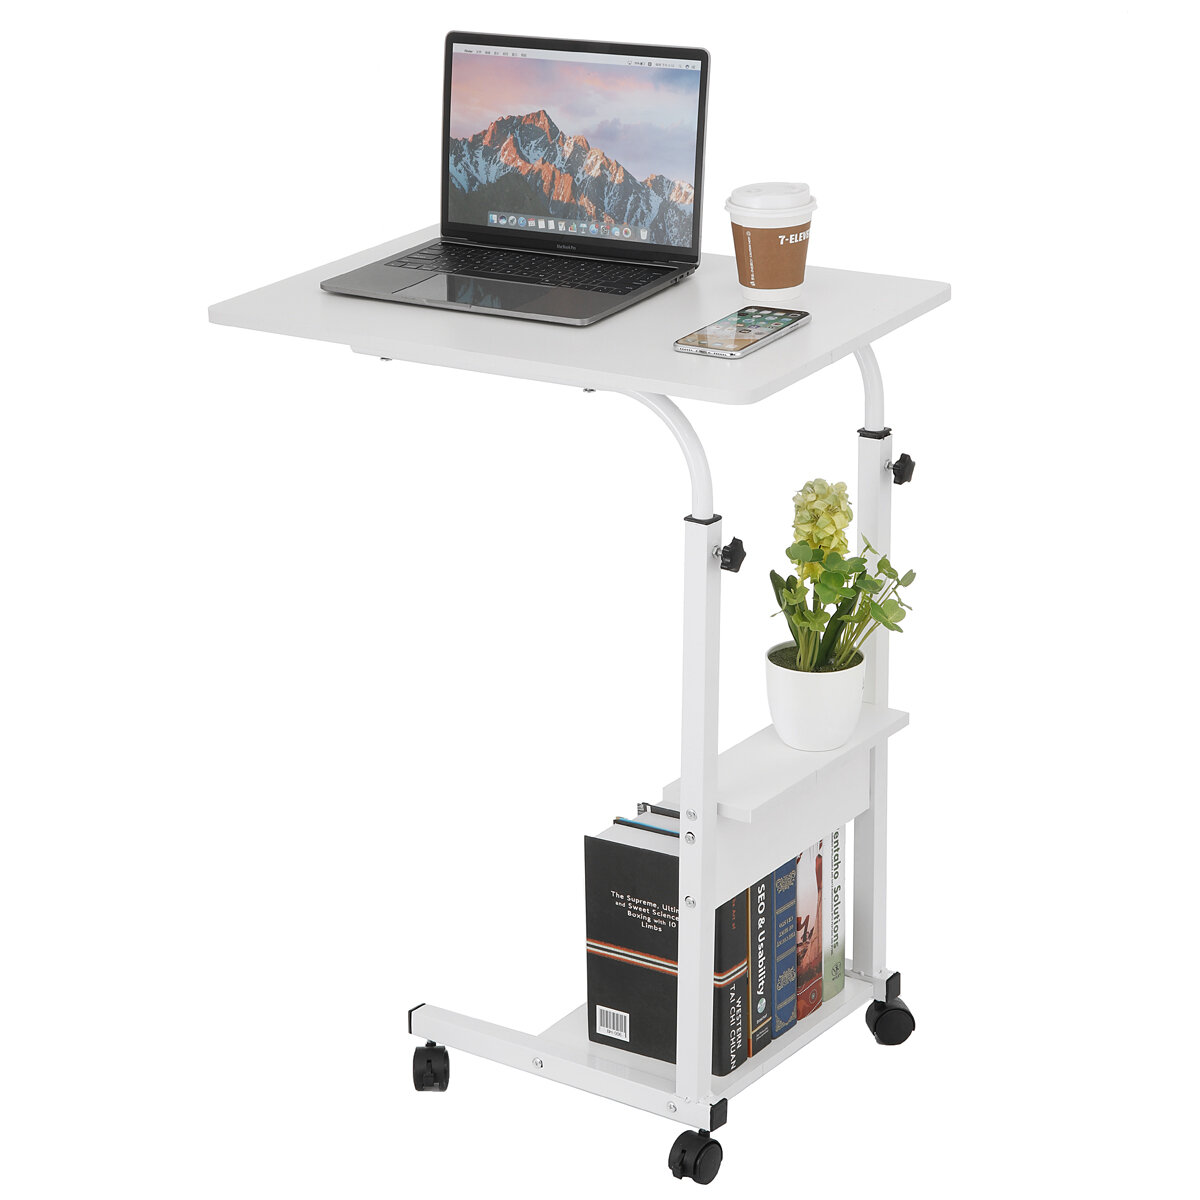 Image of Movable Laptop Desk Adjustable Height Computer Notebook Desk Writing Study Table Bedside Tray with 2 Storage Shelves Hom